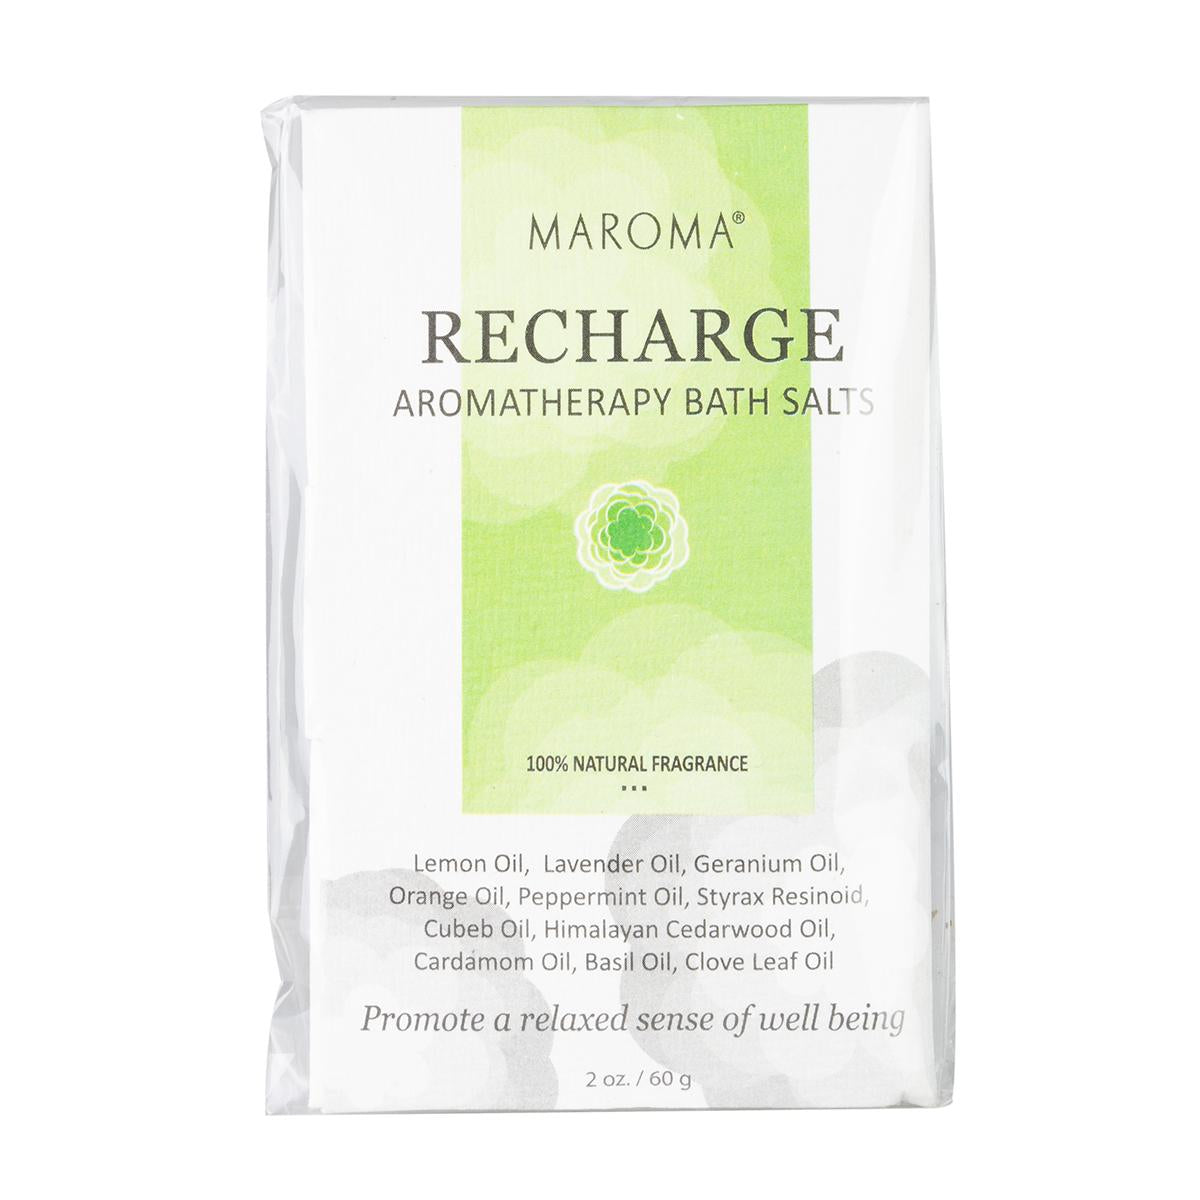 Primary image of Recharge Aromatherapy Bath Salts